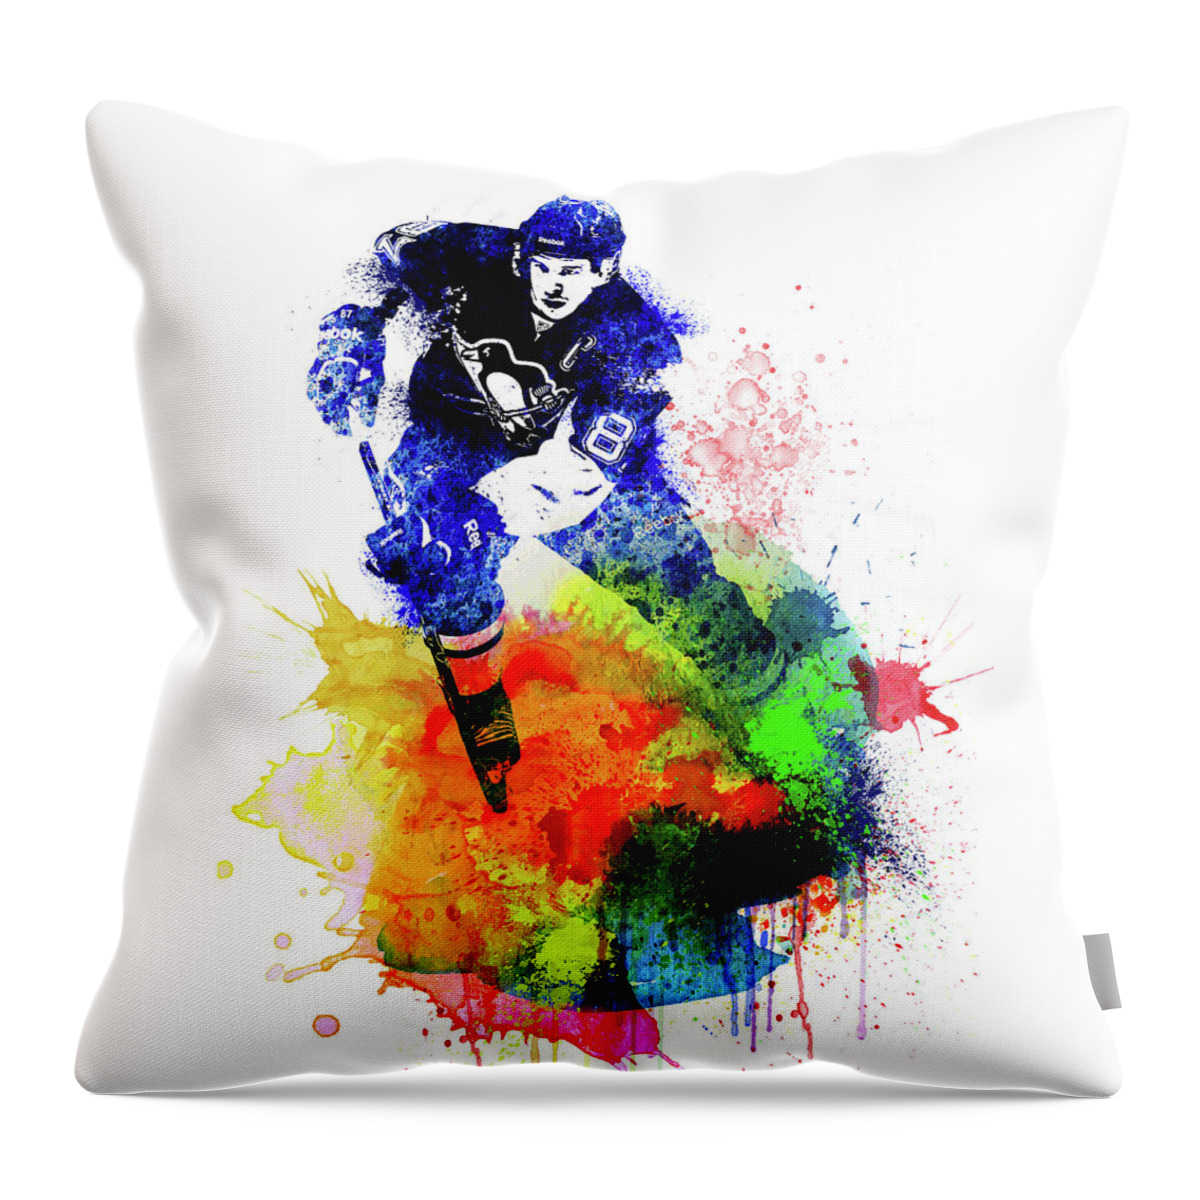 Sidney Crosby Throw Pillow featuring the digital art Sidney Crosby Watercolor I by Naxart Studio